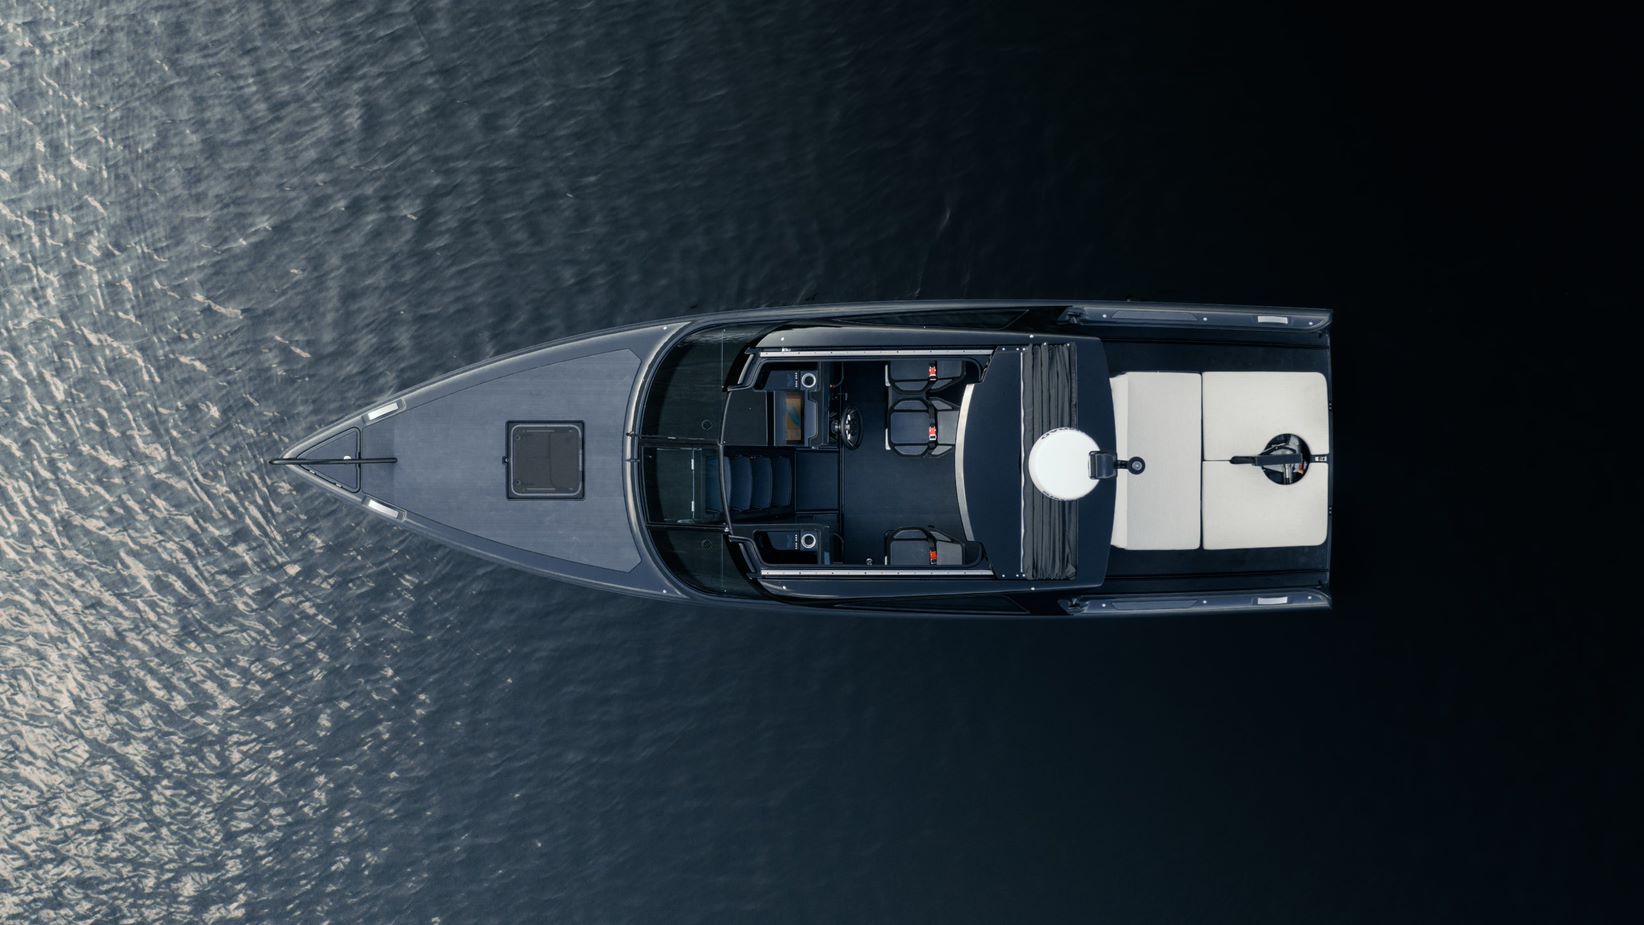 Candela reveals world's longest-range electric boat with Polestar batteries and DC charging